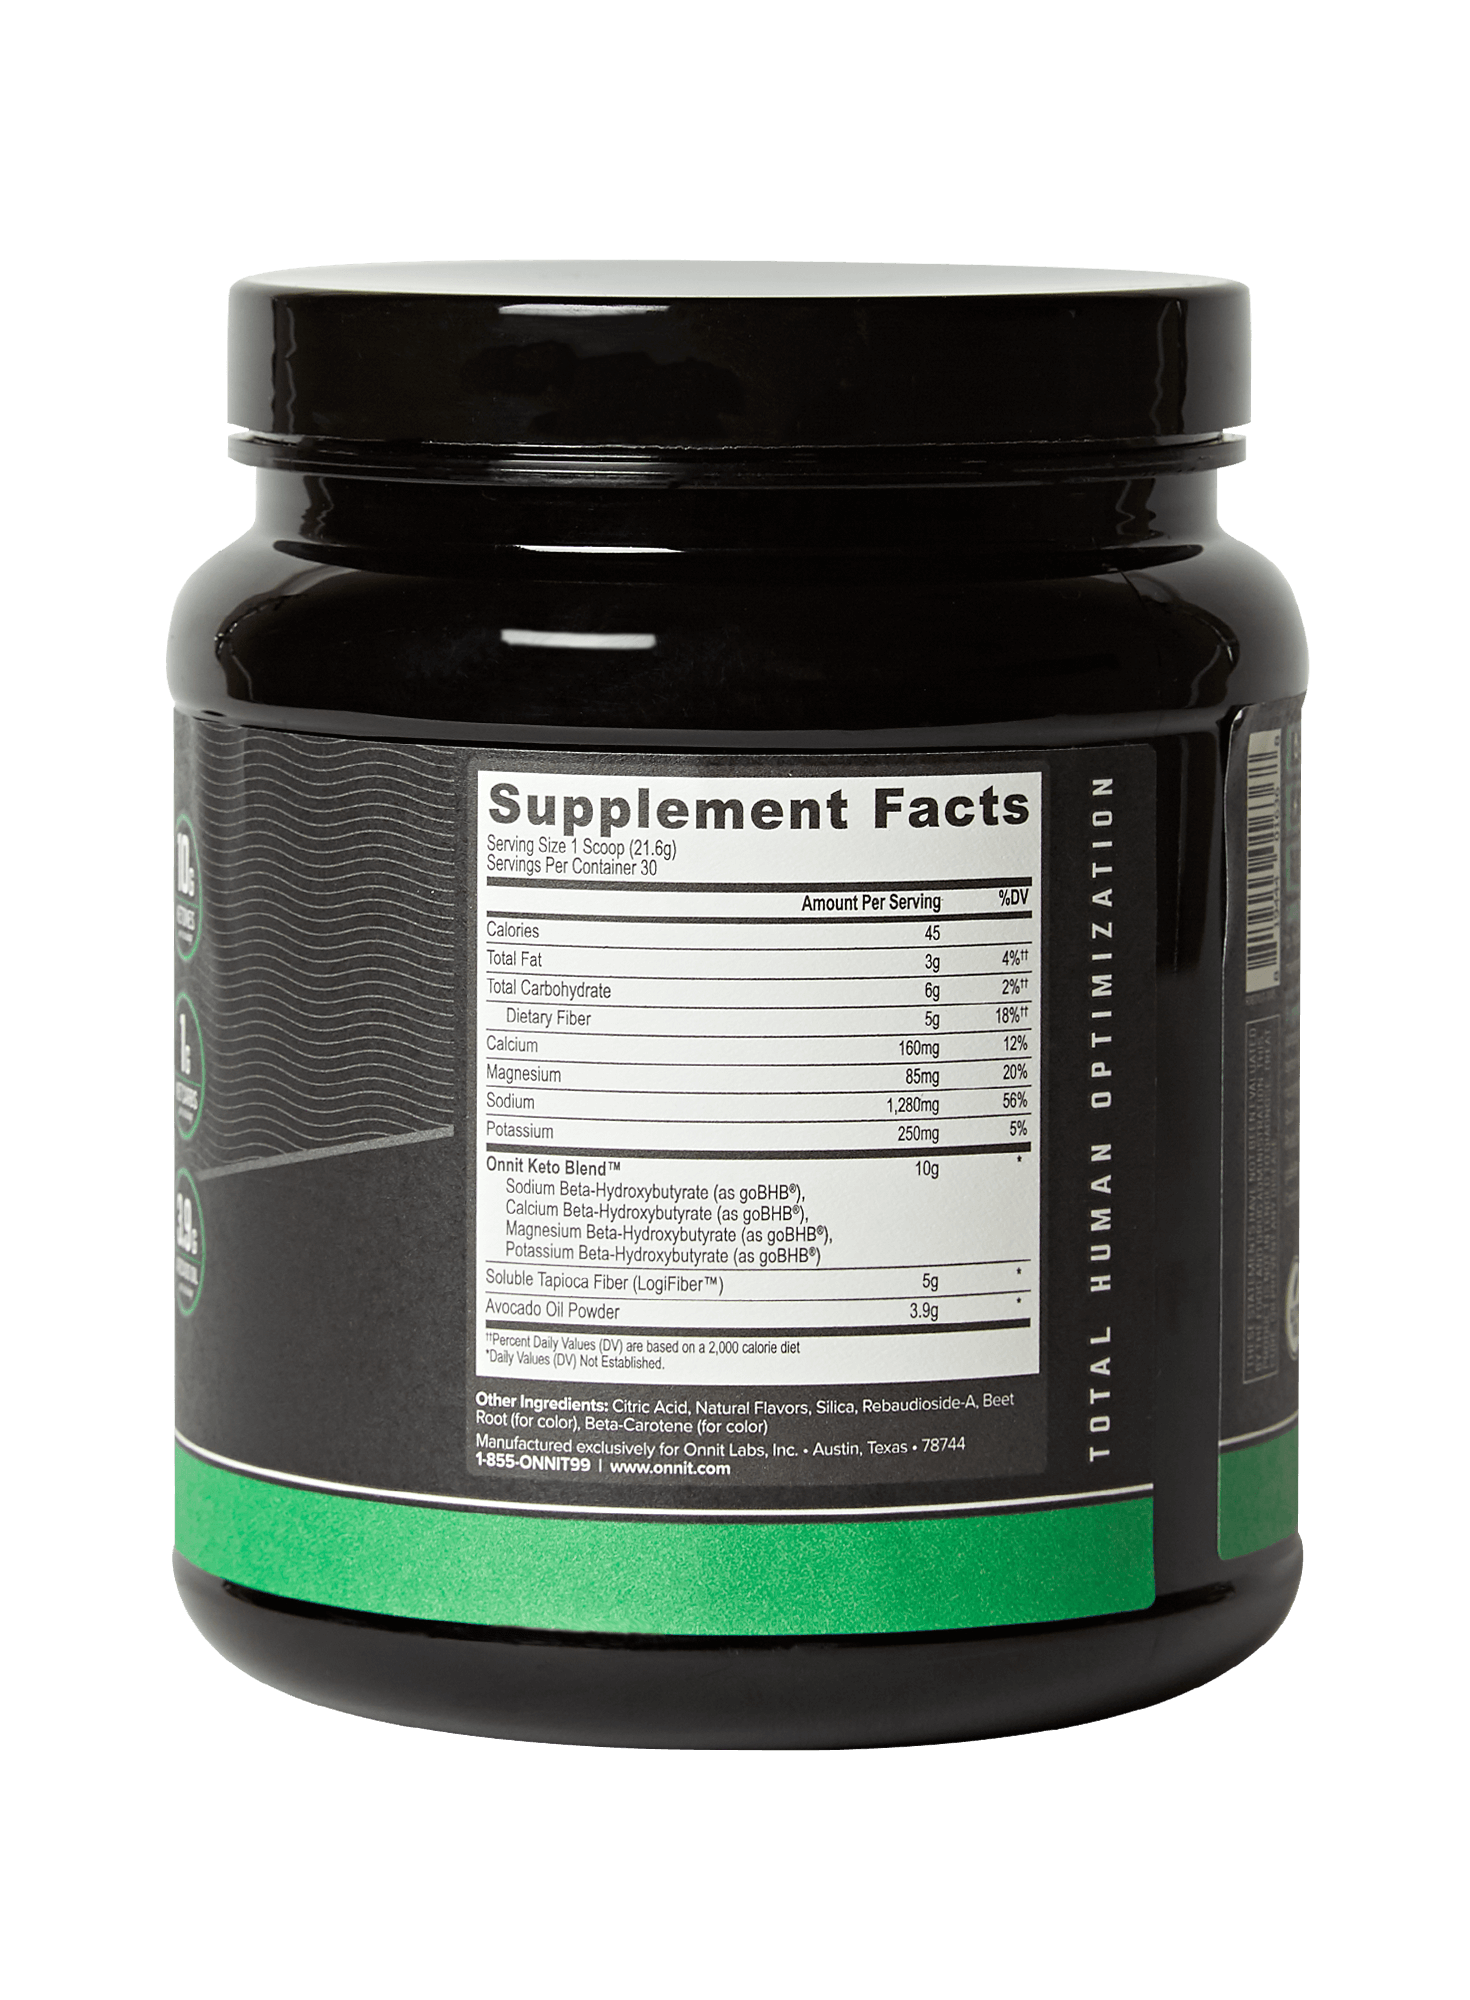 Total Keto Daily - The Best Exogenous Ketone Supplement | Onnit